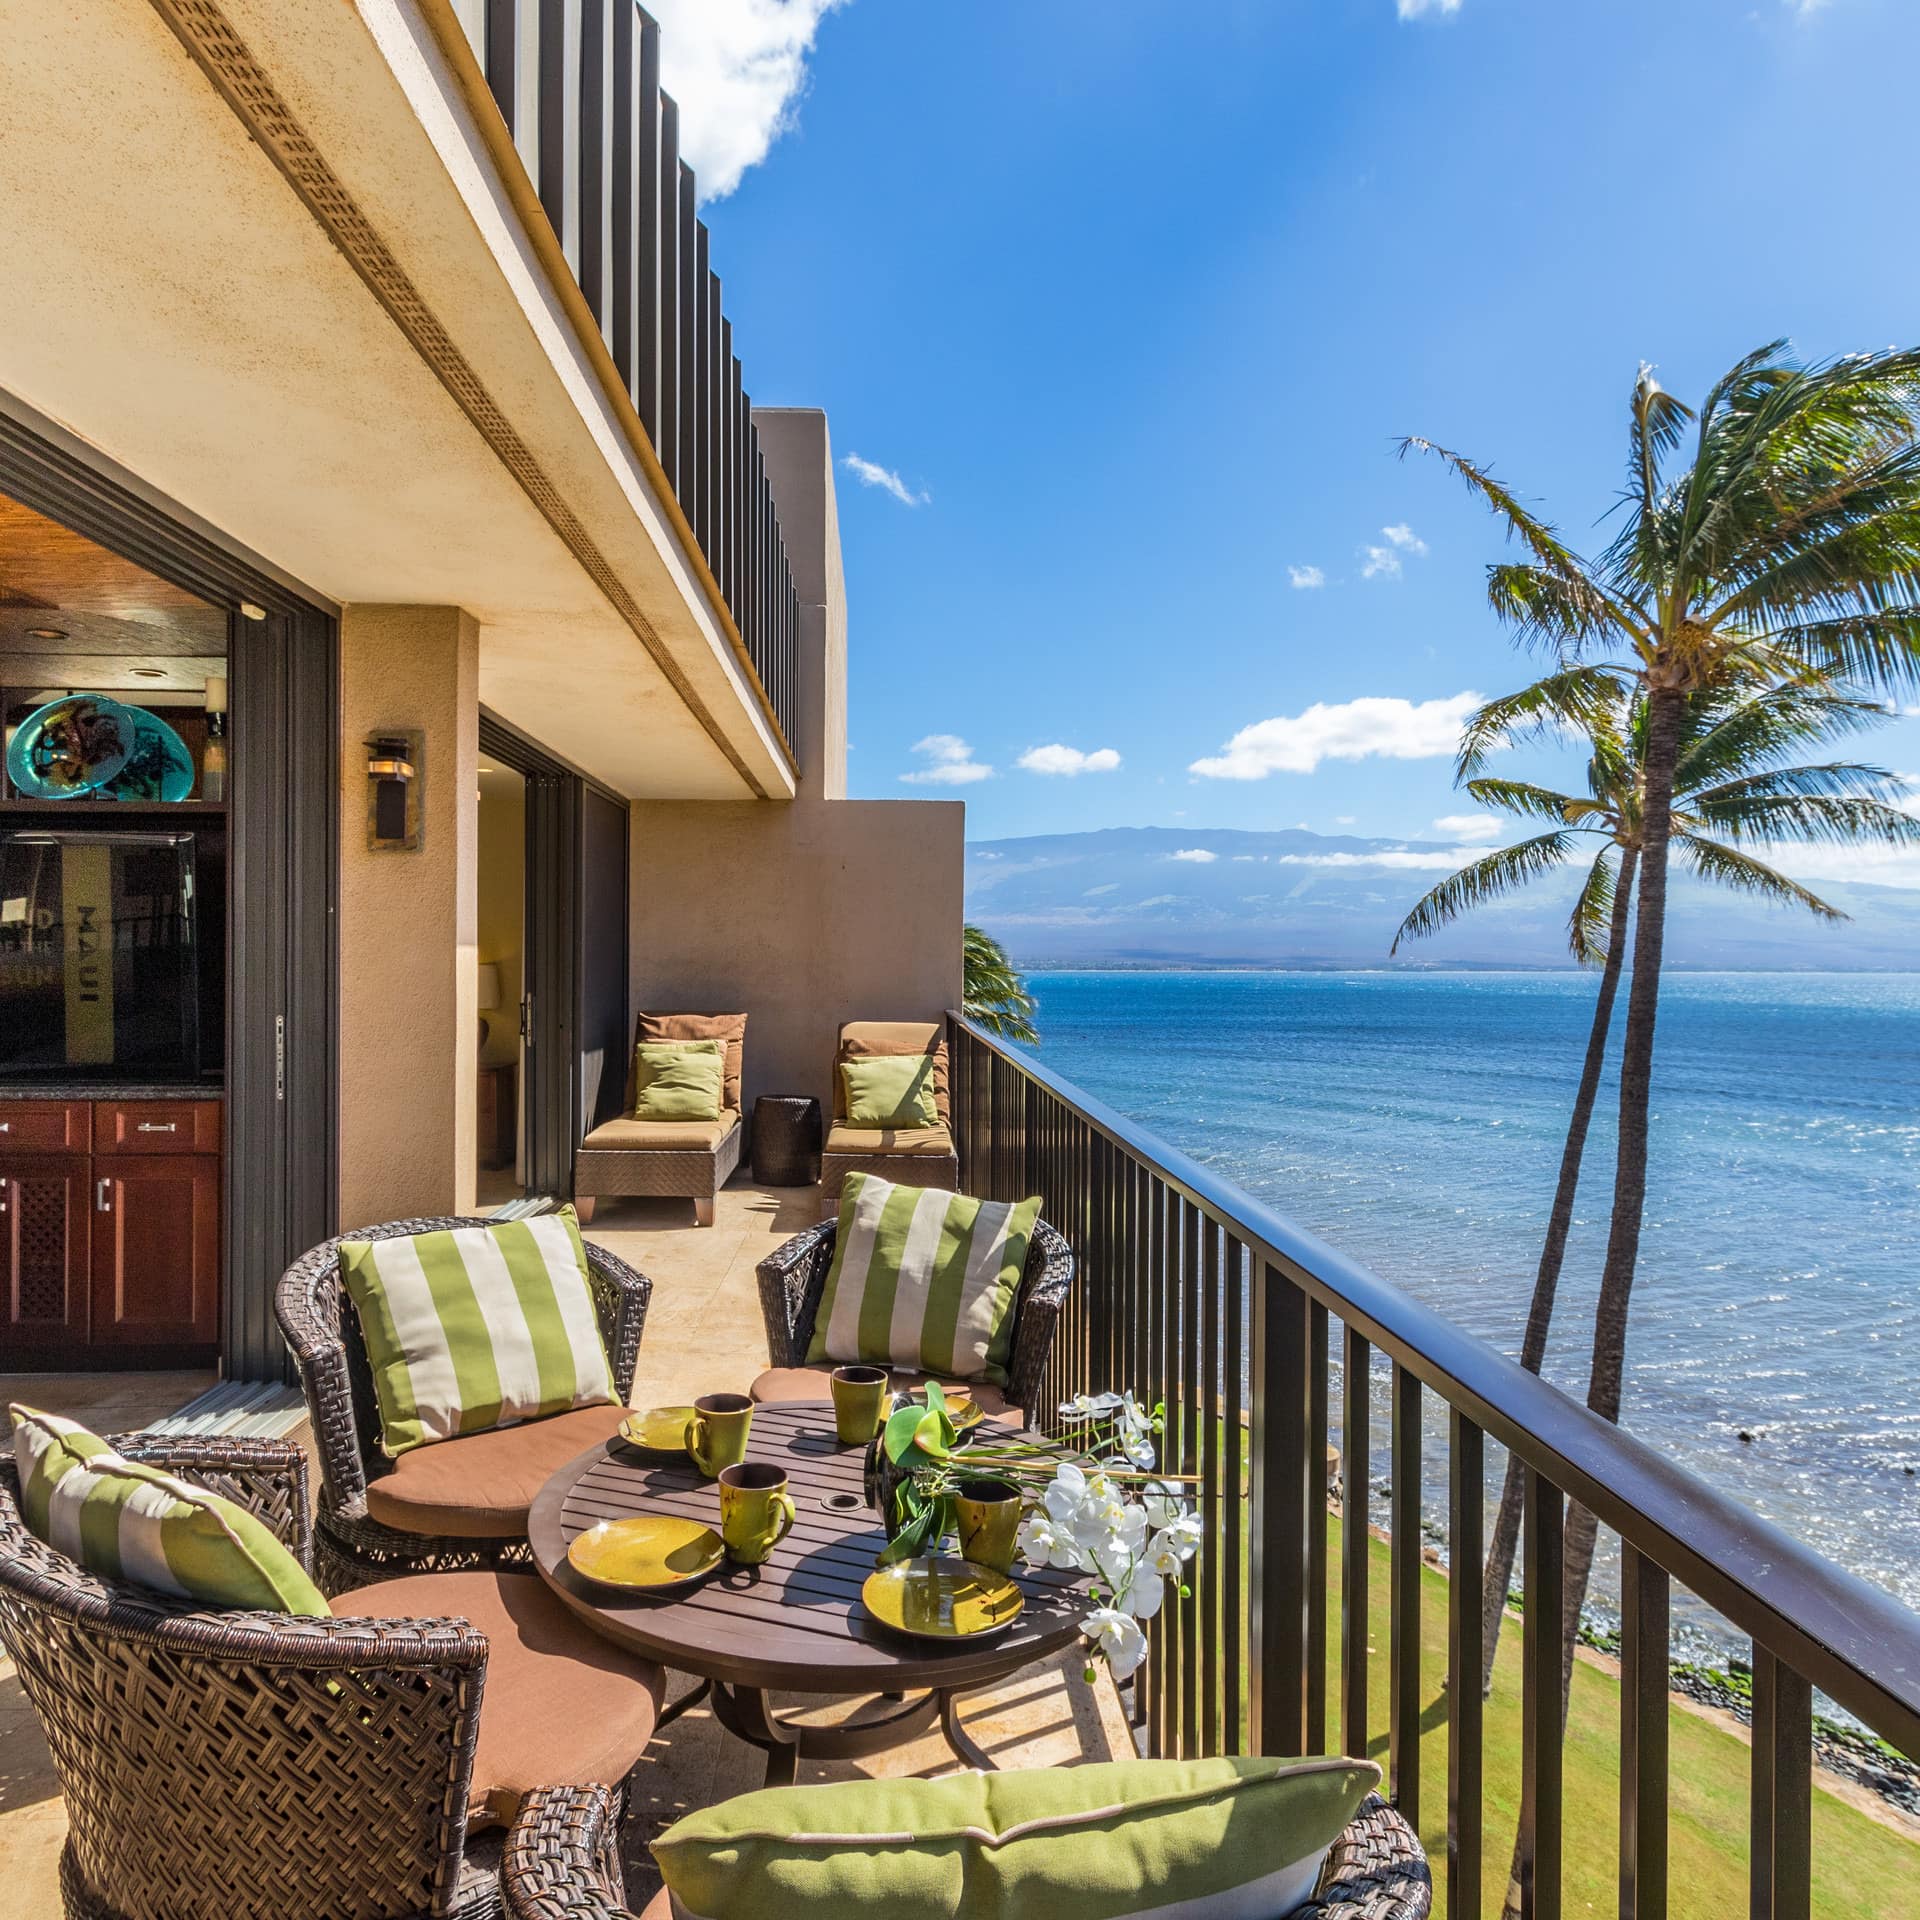 Oceanfront condo with sun deck and outdoor furniture in Maui, Hawaii